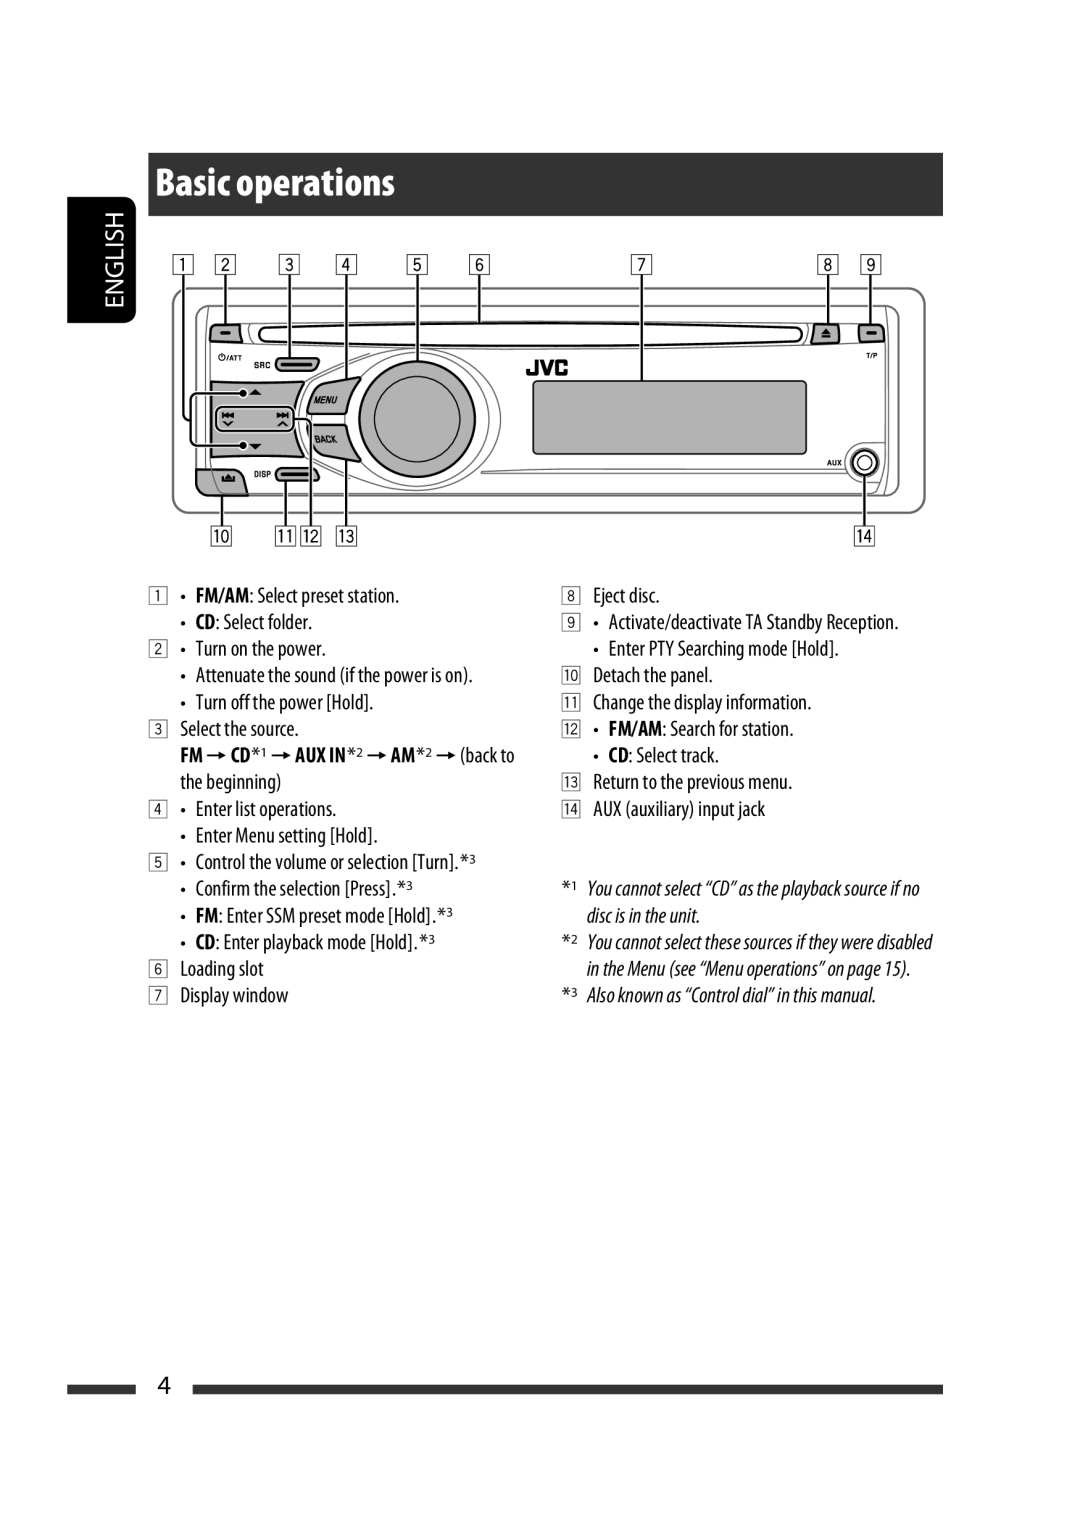 JVC KD-R303, KD-R302, KD-R301 manual Basic operations, English, disc is in the unit 